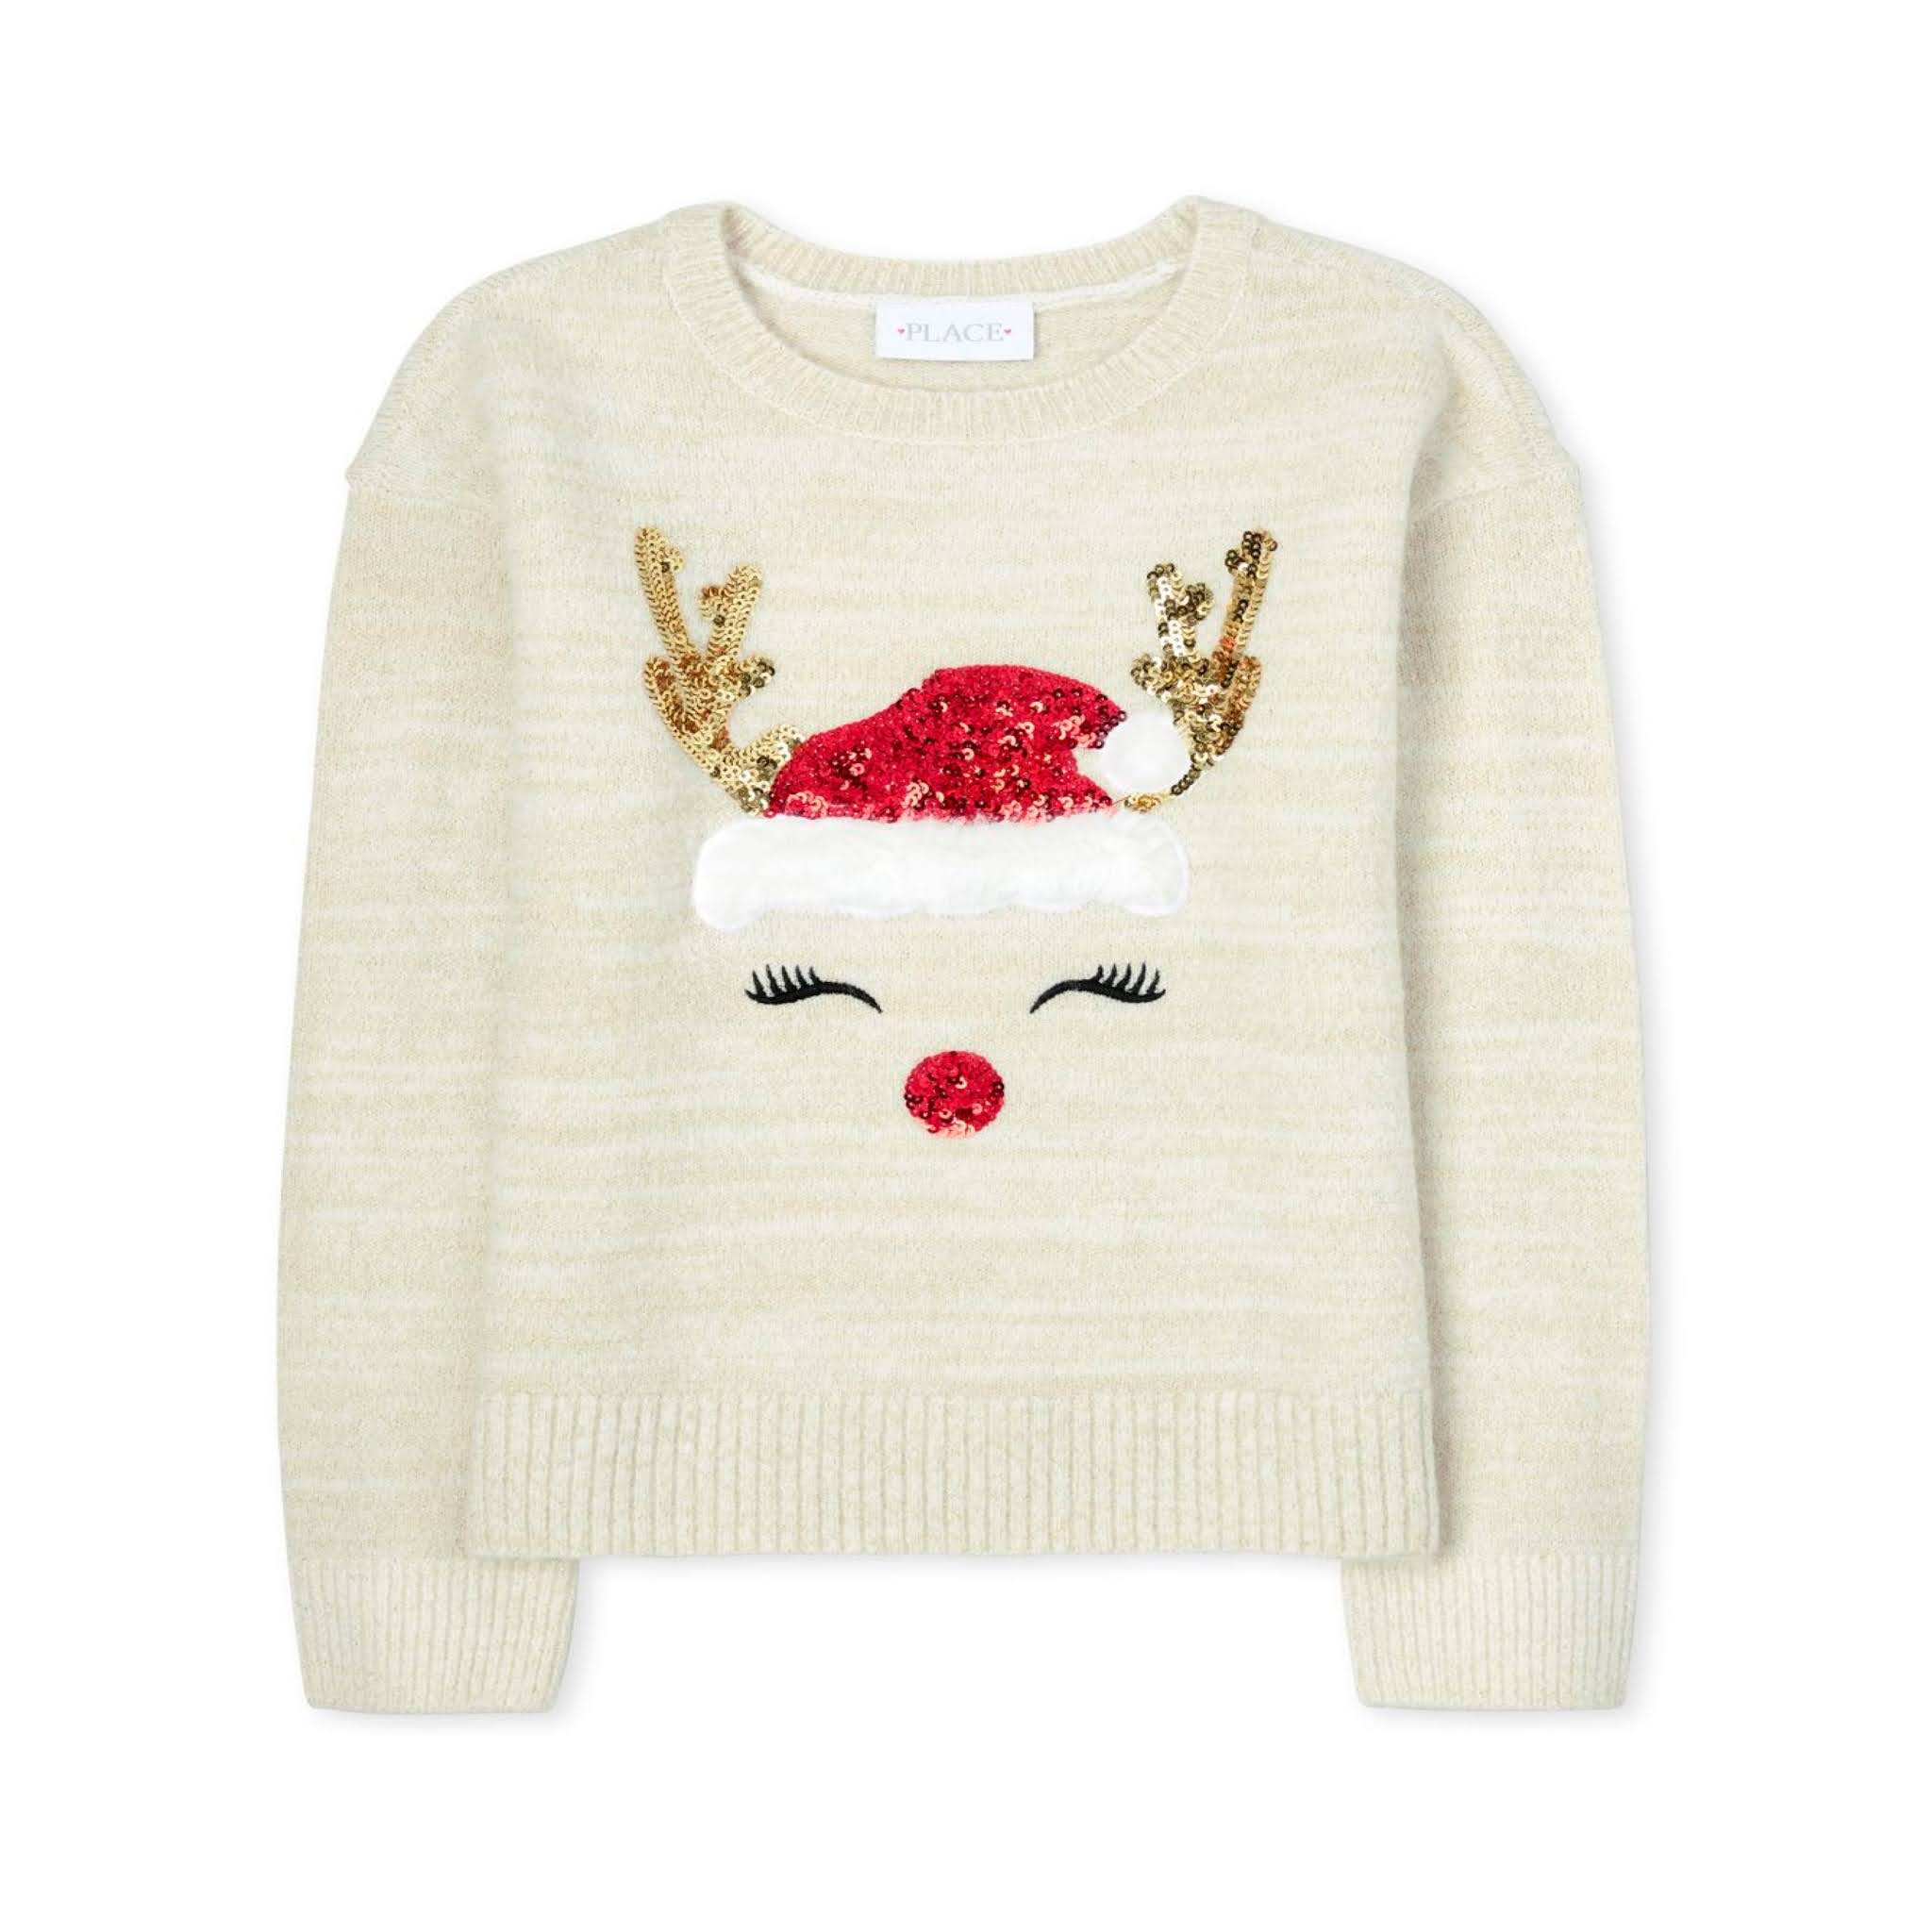 Girls Embellished Christmas Reindeer Sweater from The Children's Place